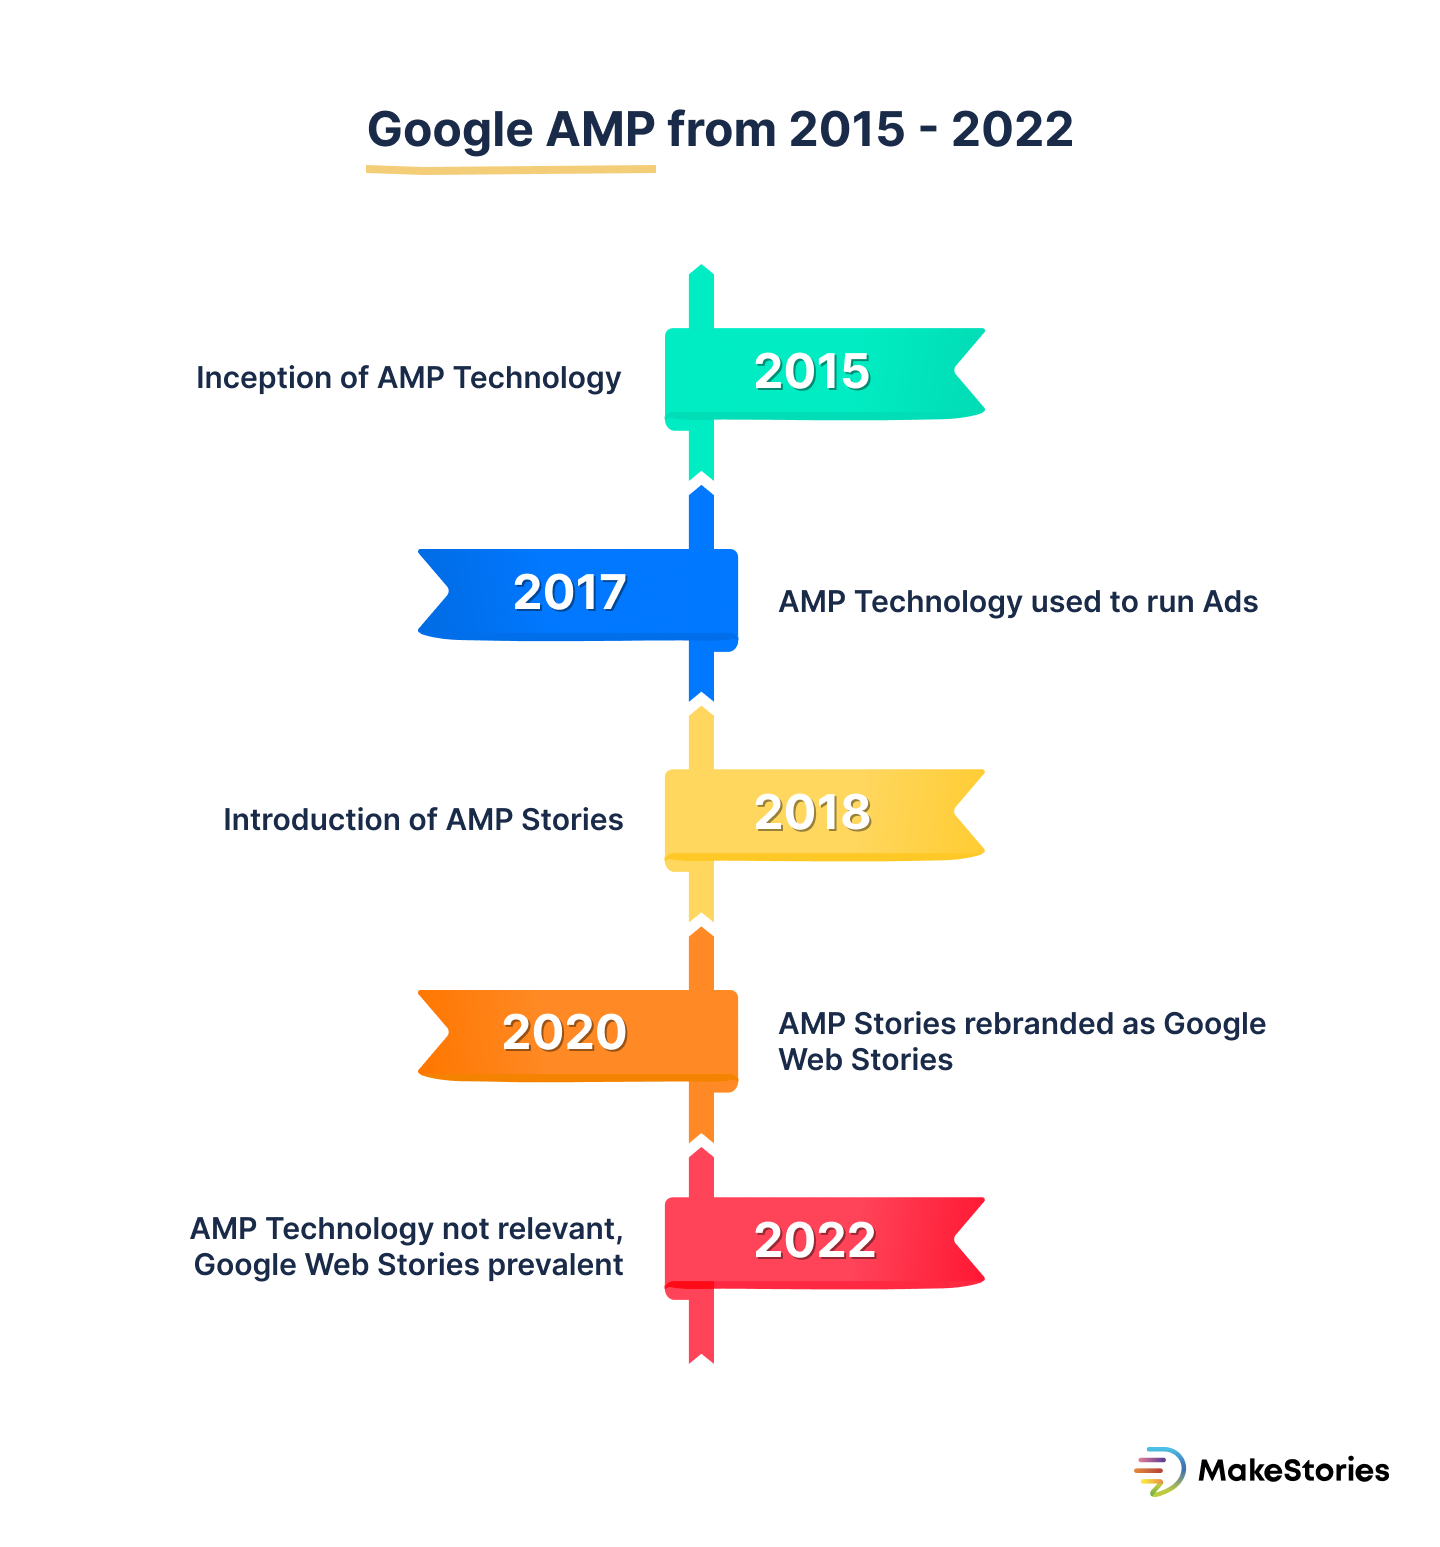 Google-AMP-from-2015-2022